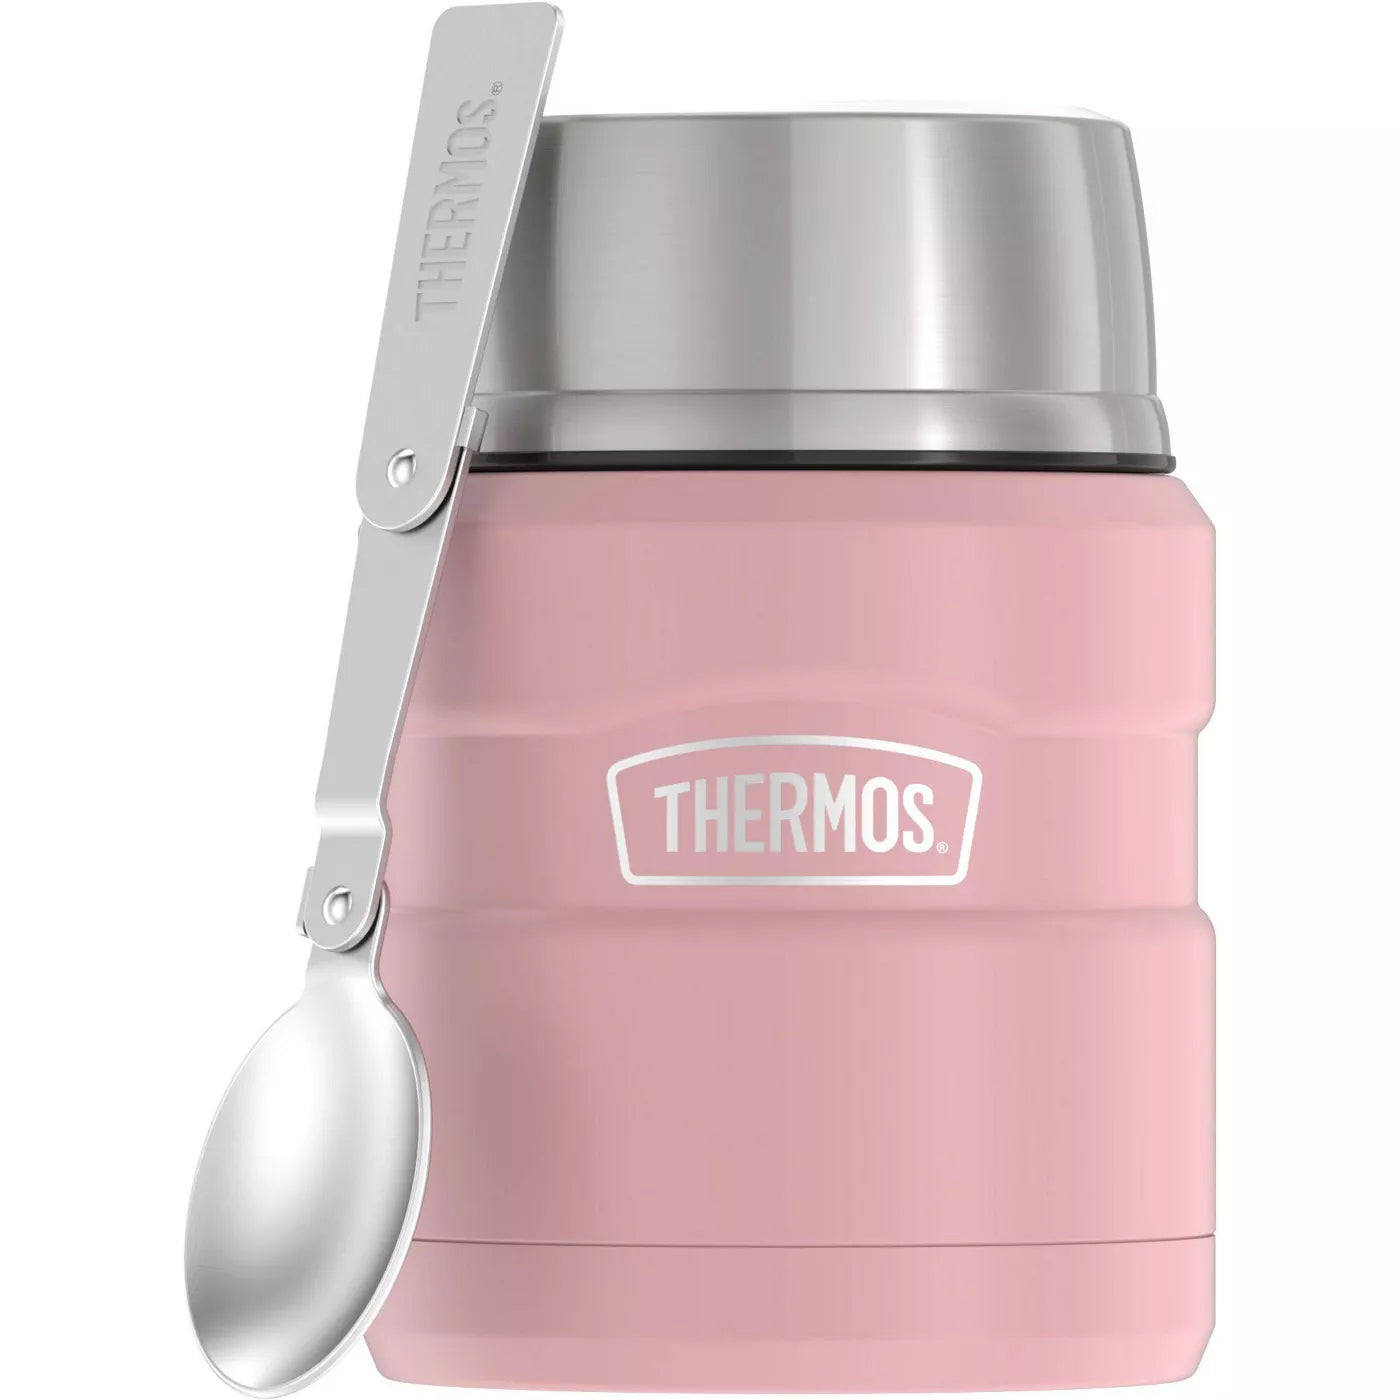 Thermos Stainless King Food Jar with Spoon - 16 Oz.